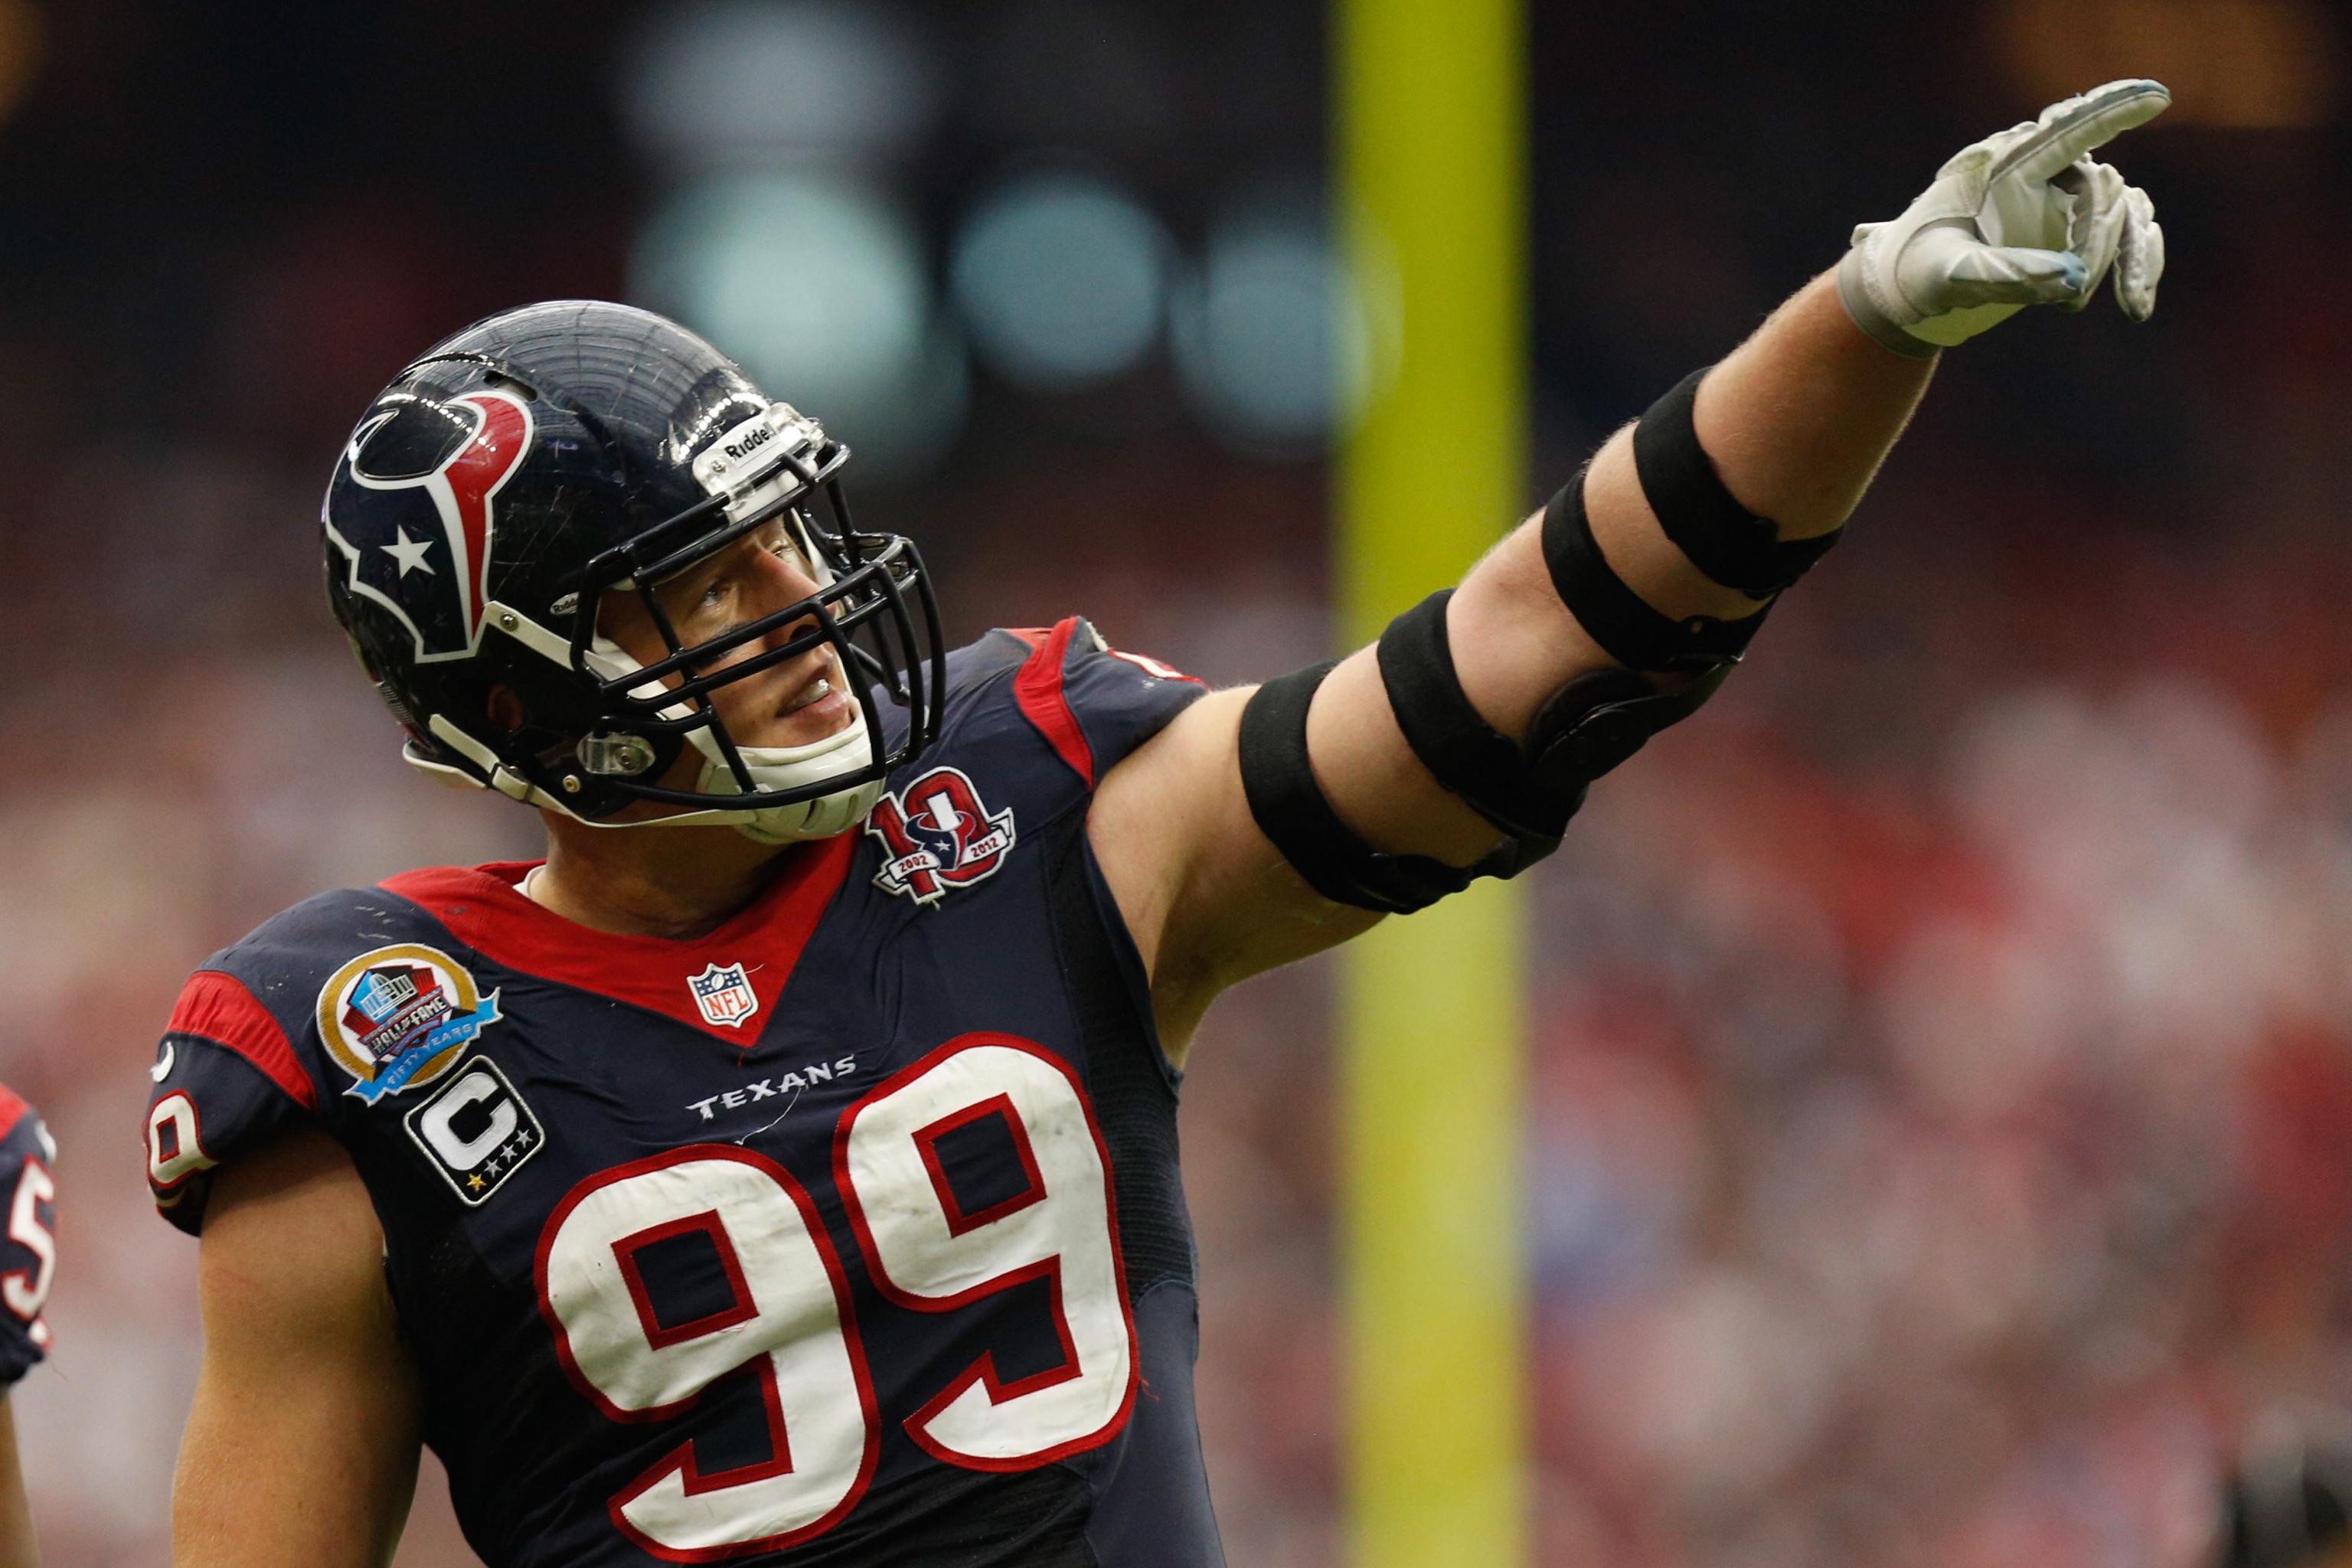 JJ Watt on X: Underrated stadium and fanbase in my opinion. This